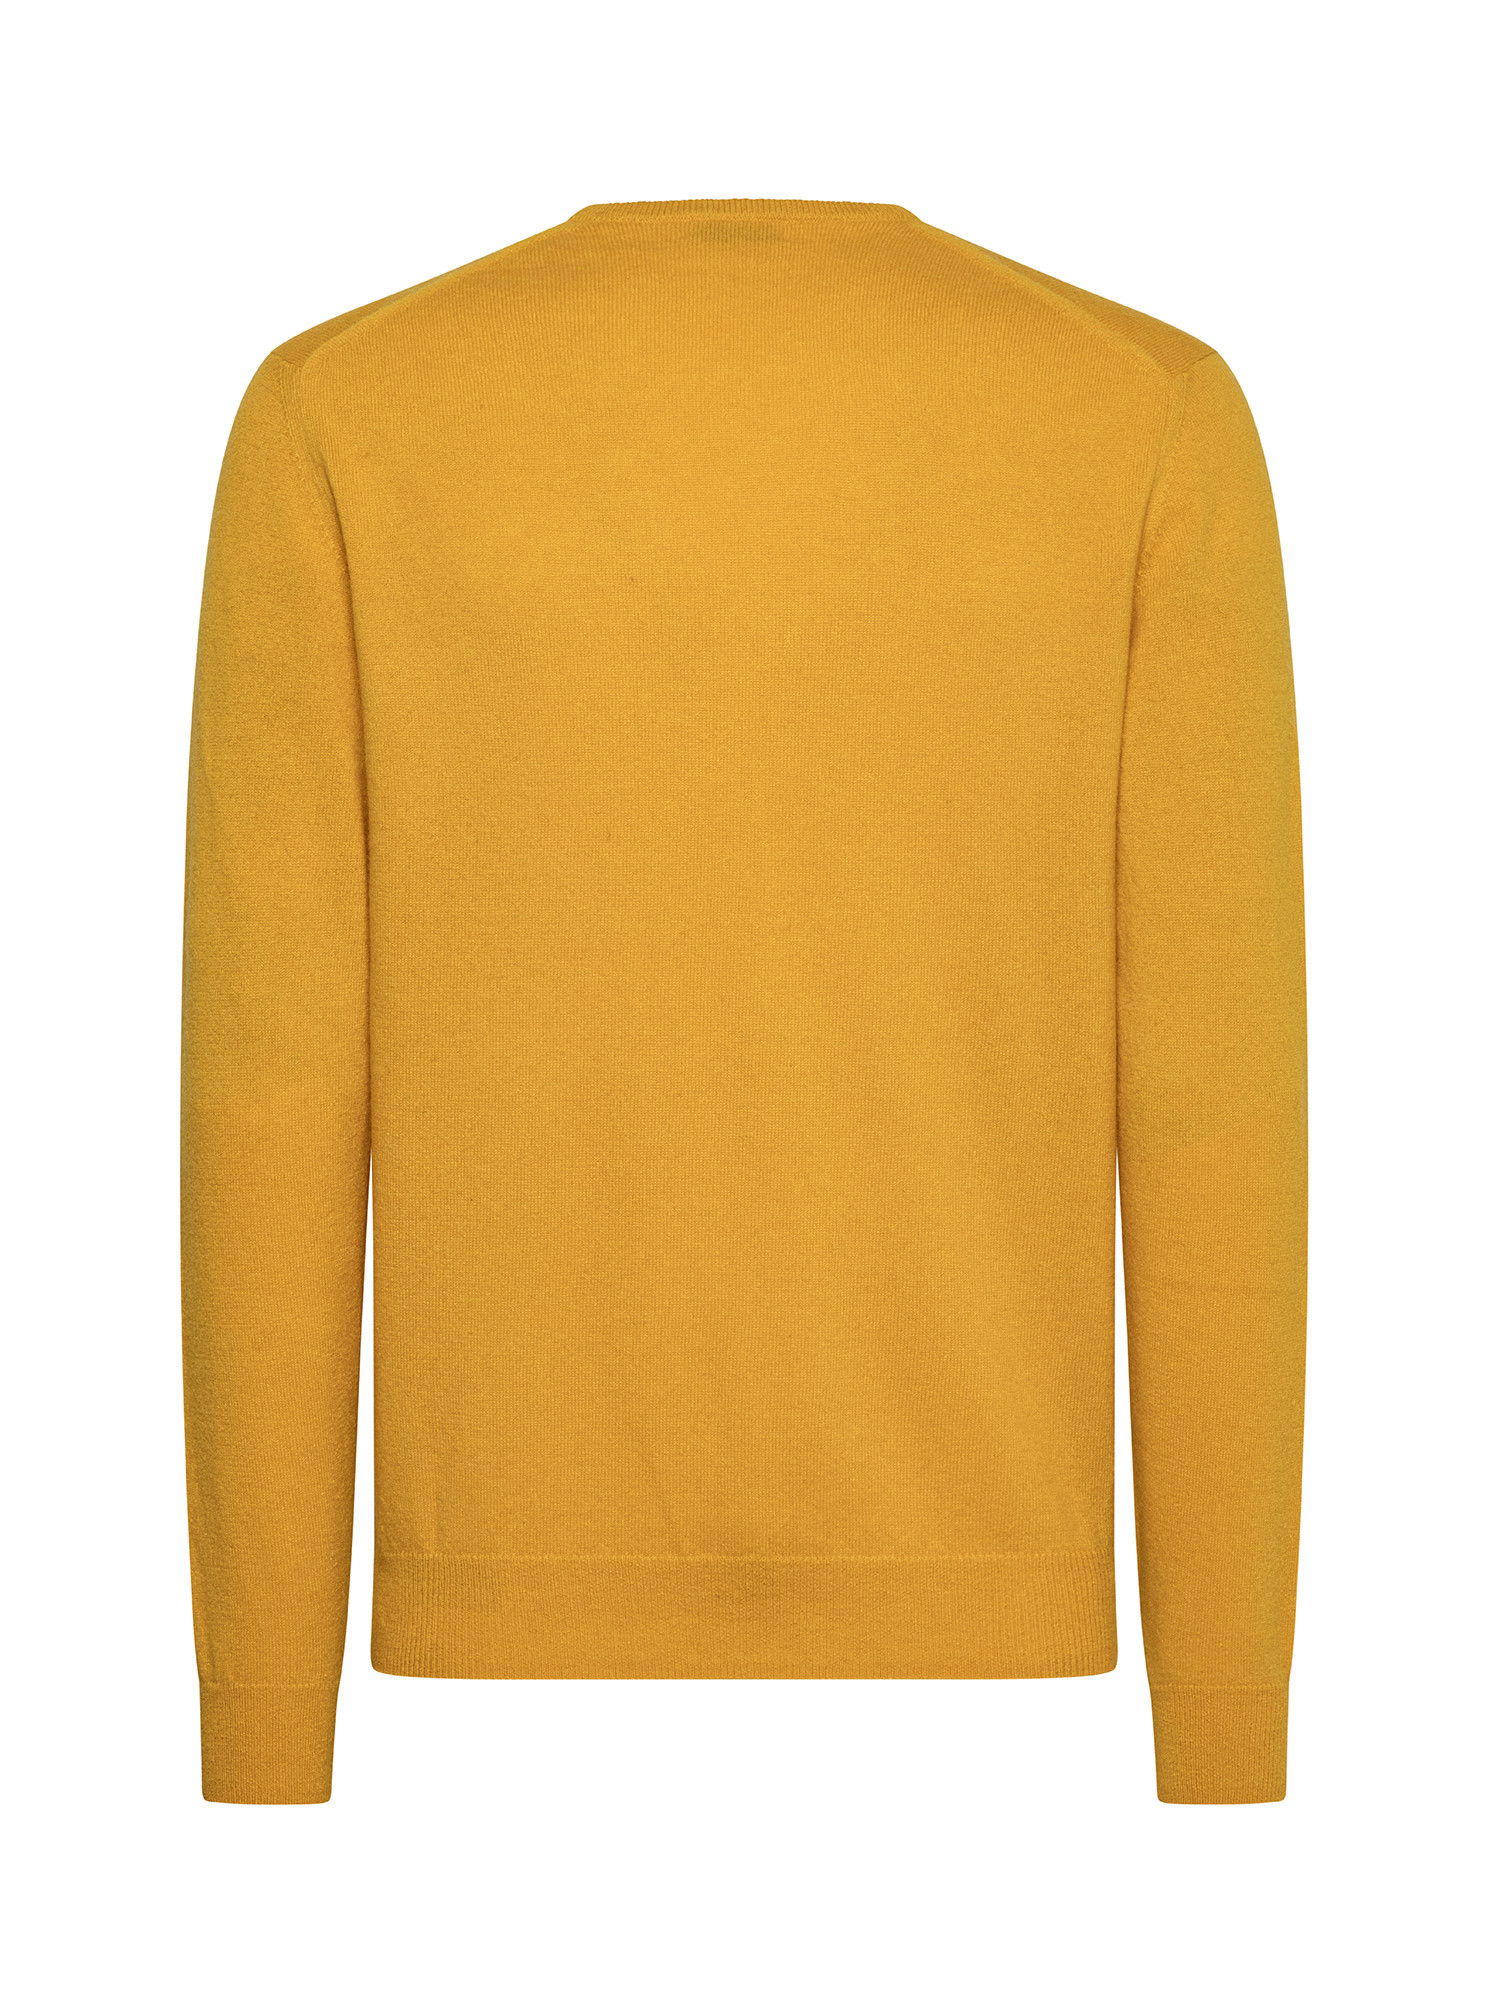 Pullover girocollo in puro cashmere, Giallo, large image number 1